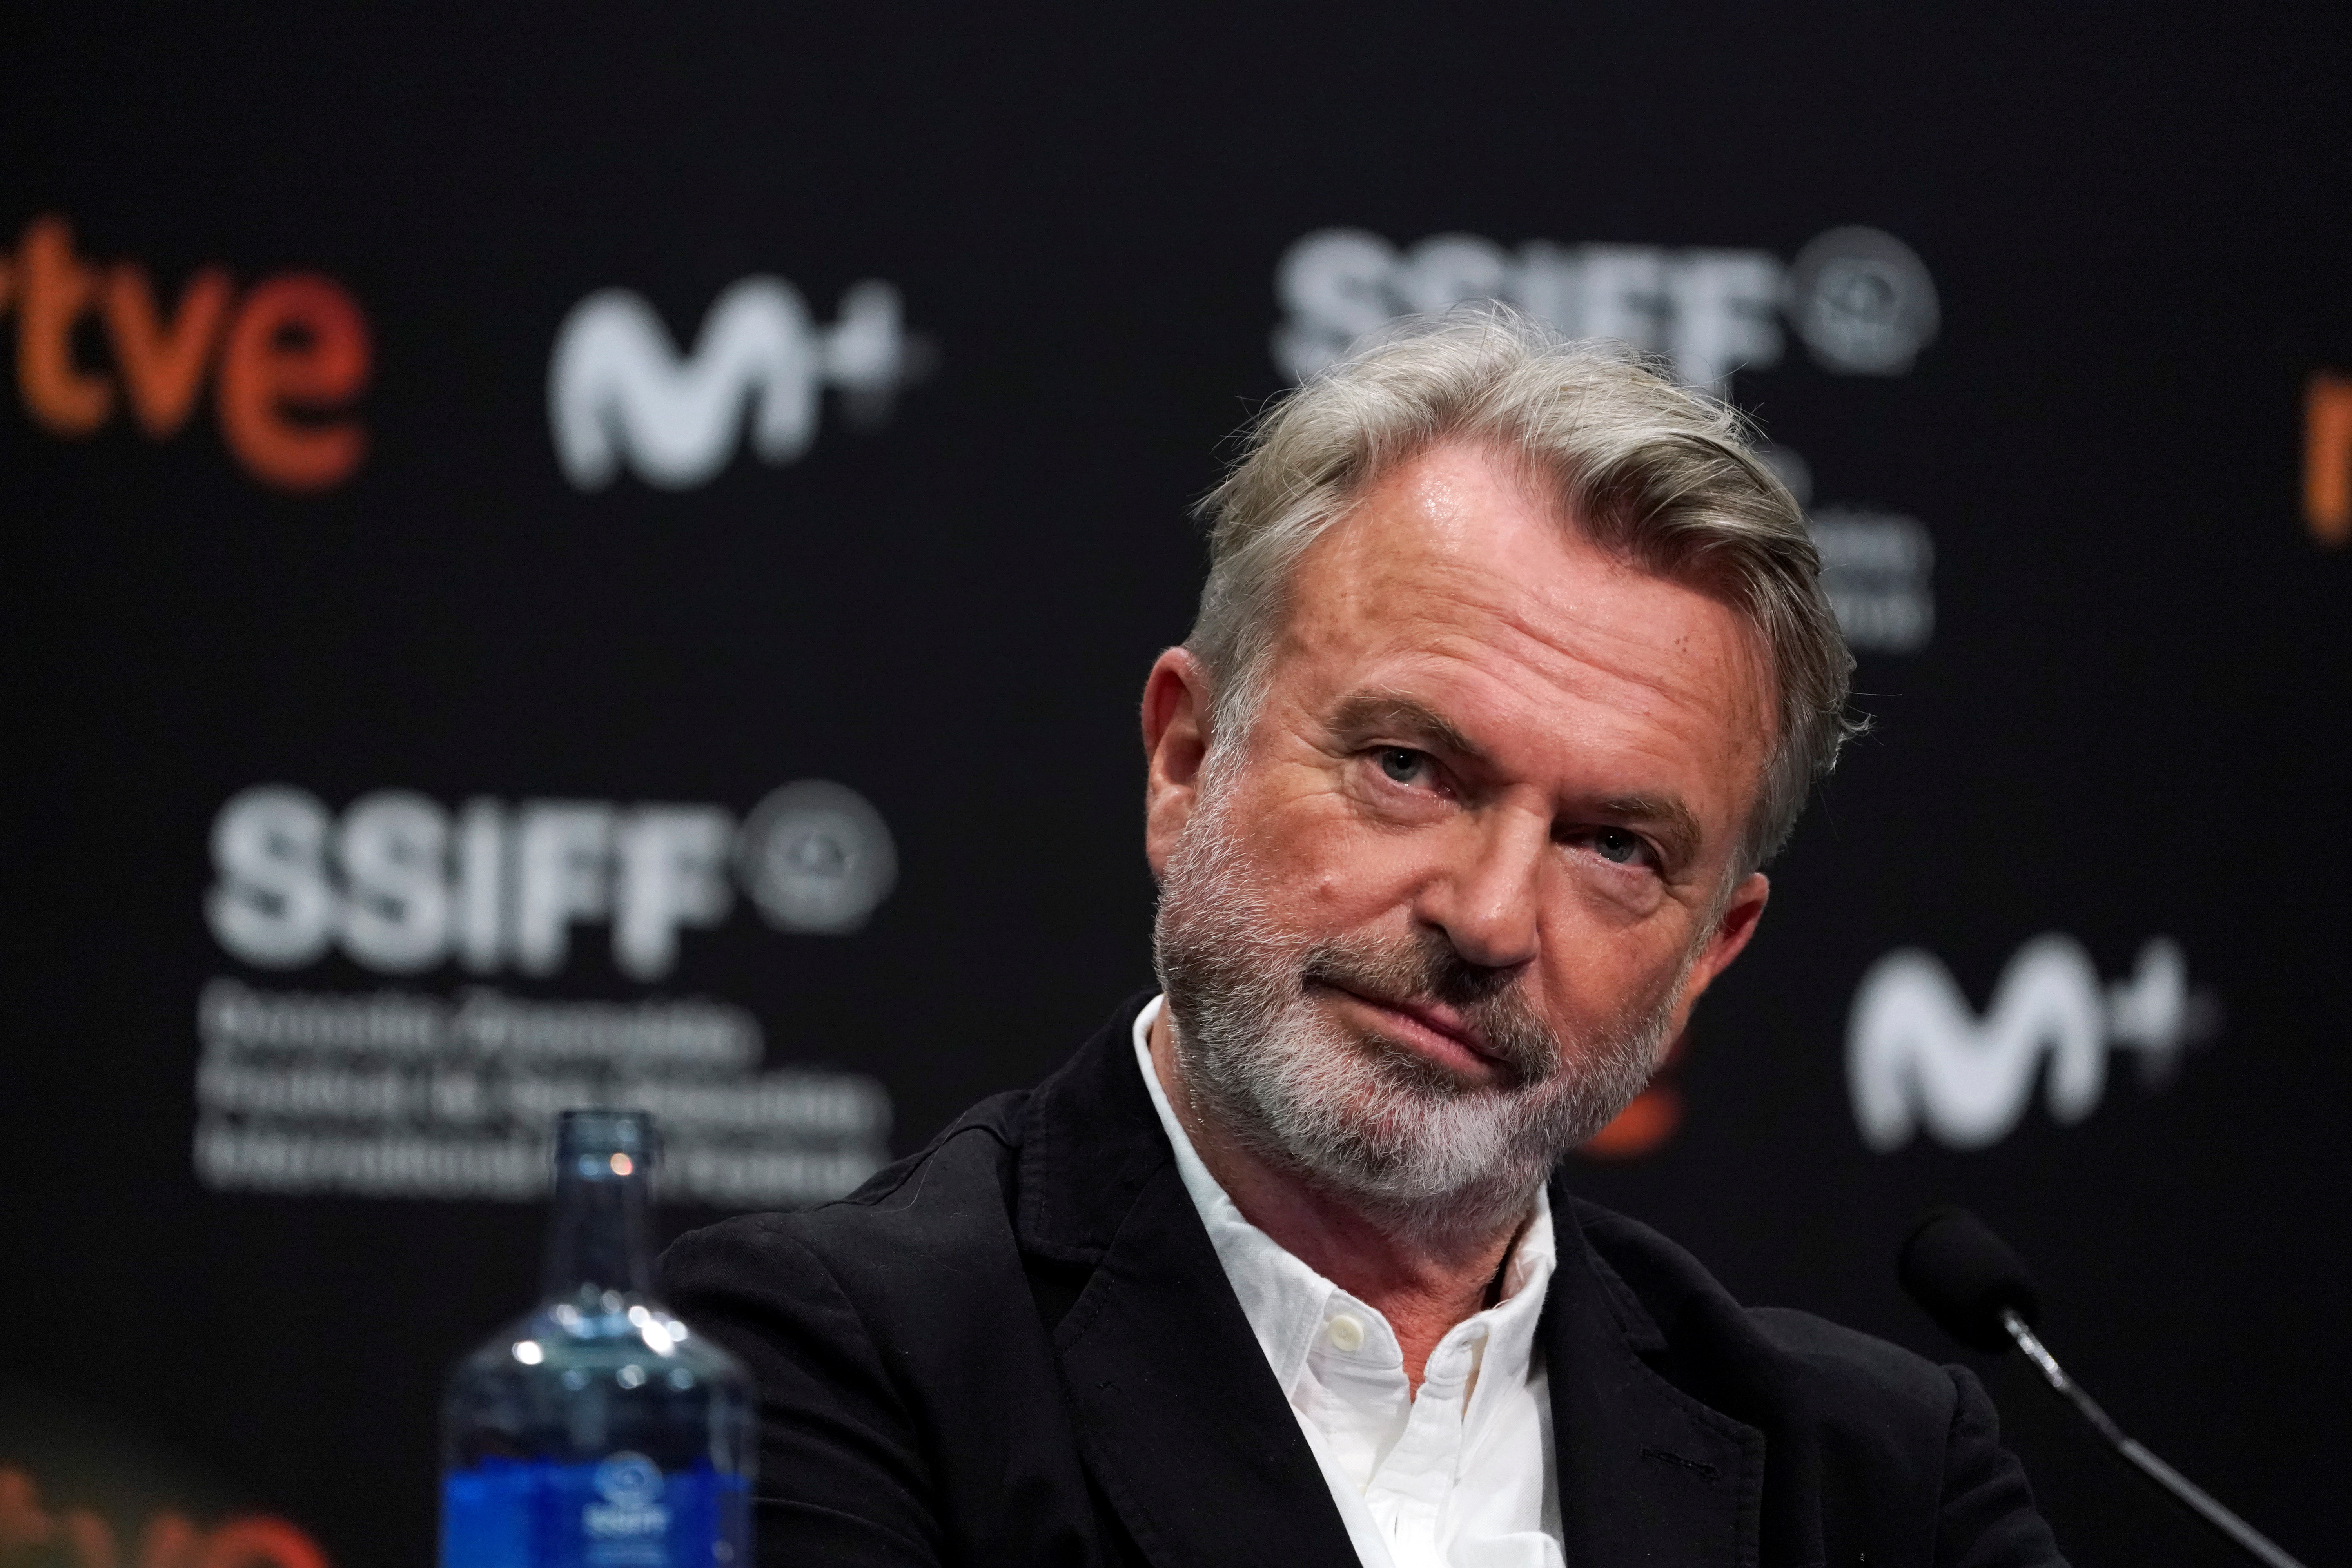 New Zealand actor Sam Neill takes part in a news conference to promote the feature film Blackbird, at the San Sebastian Film Festival